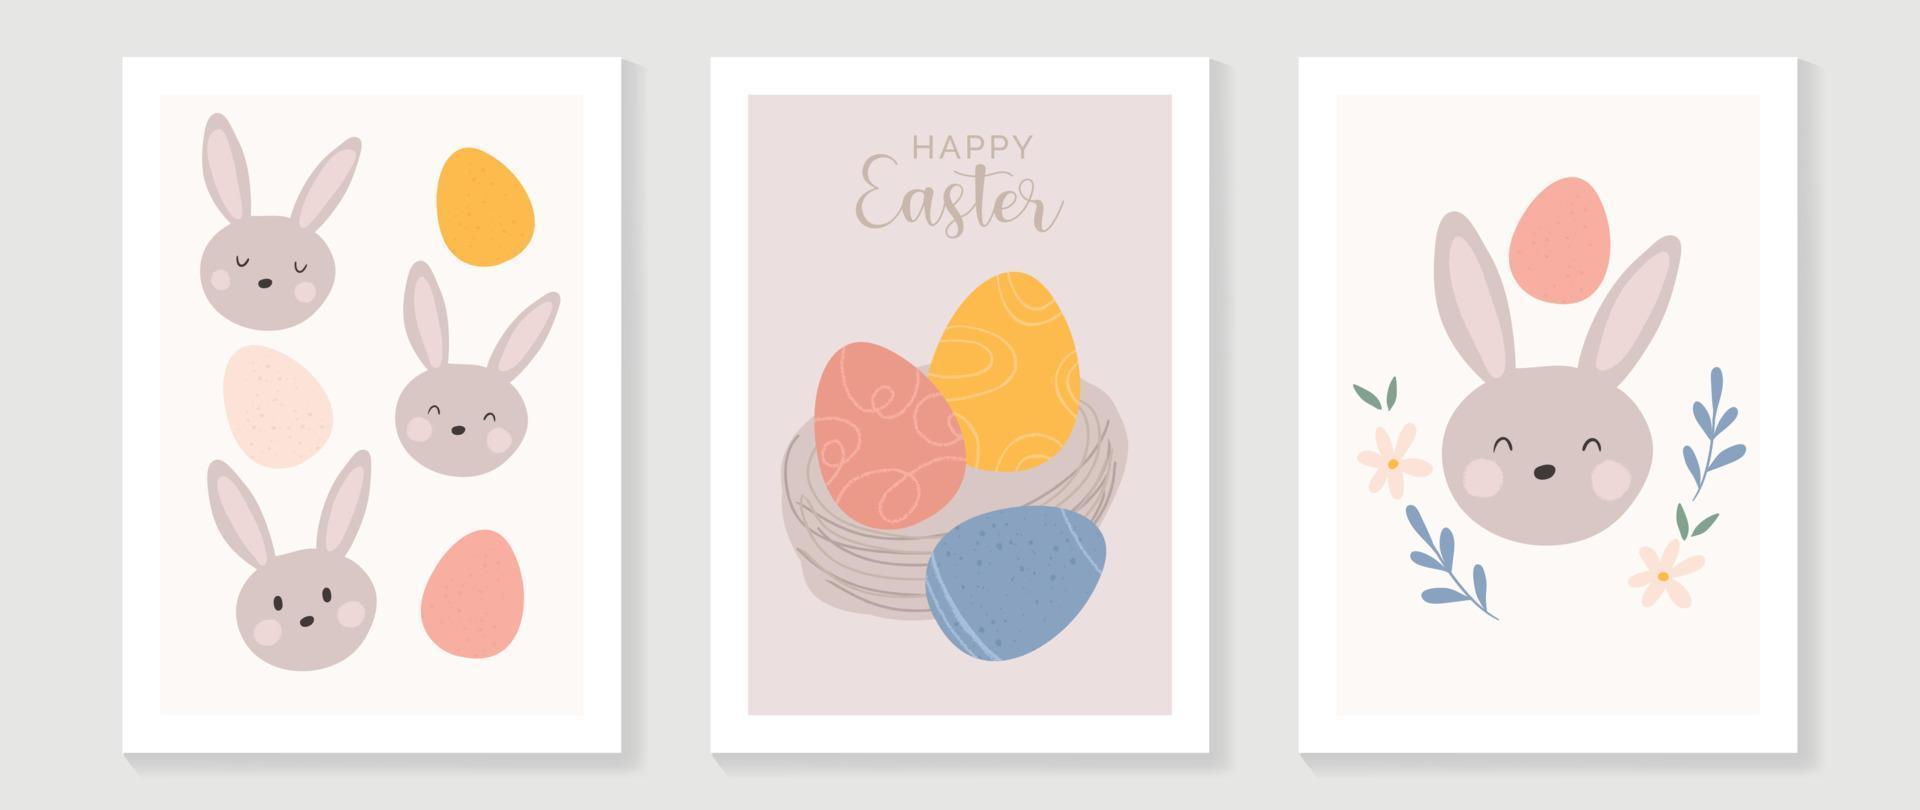 Cute comic easter wall art vector set. Collection of adorable hand drawn rabbits, flowers, easter eggs. Design illustration for nursery wall art in doodle style, baby, kids poster, card, invitation.